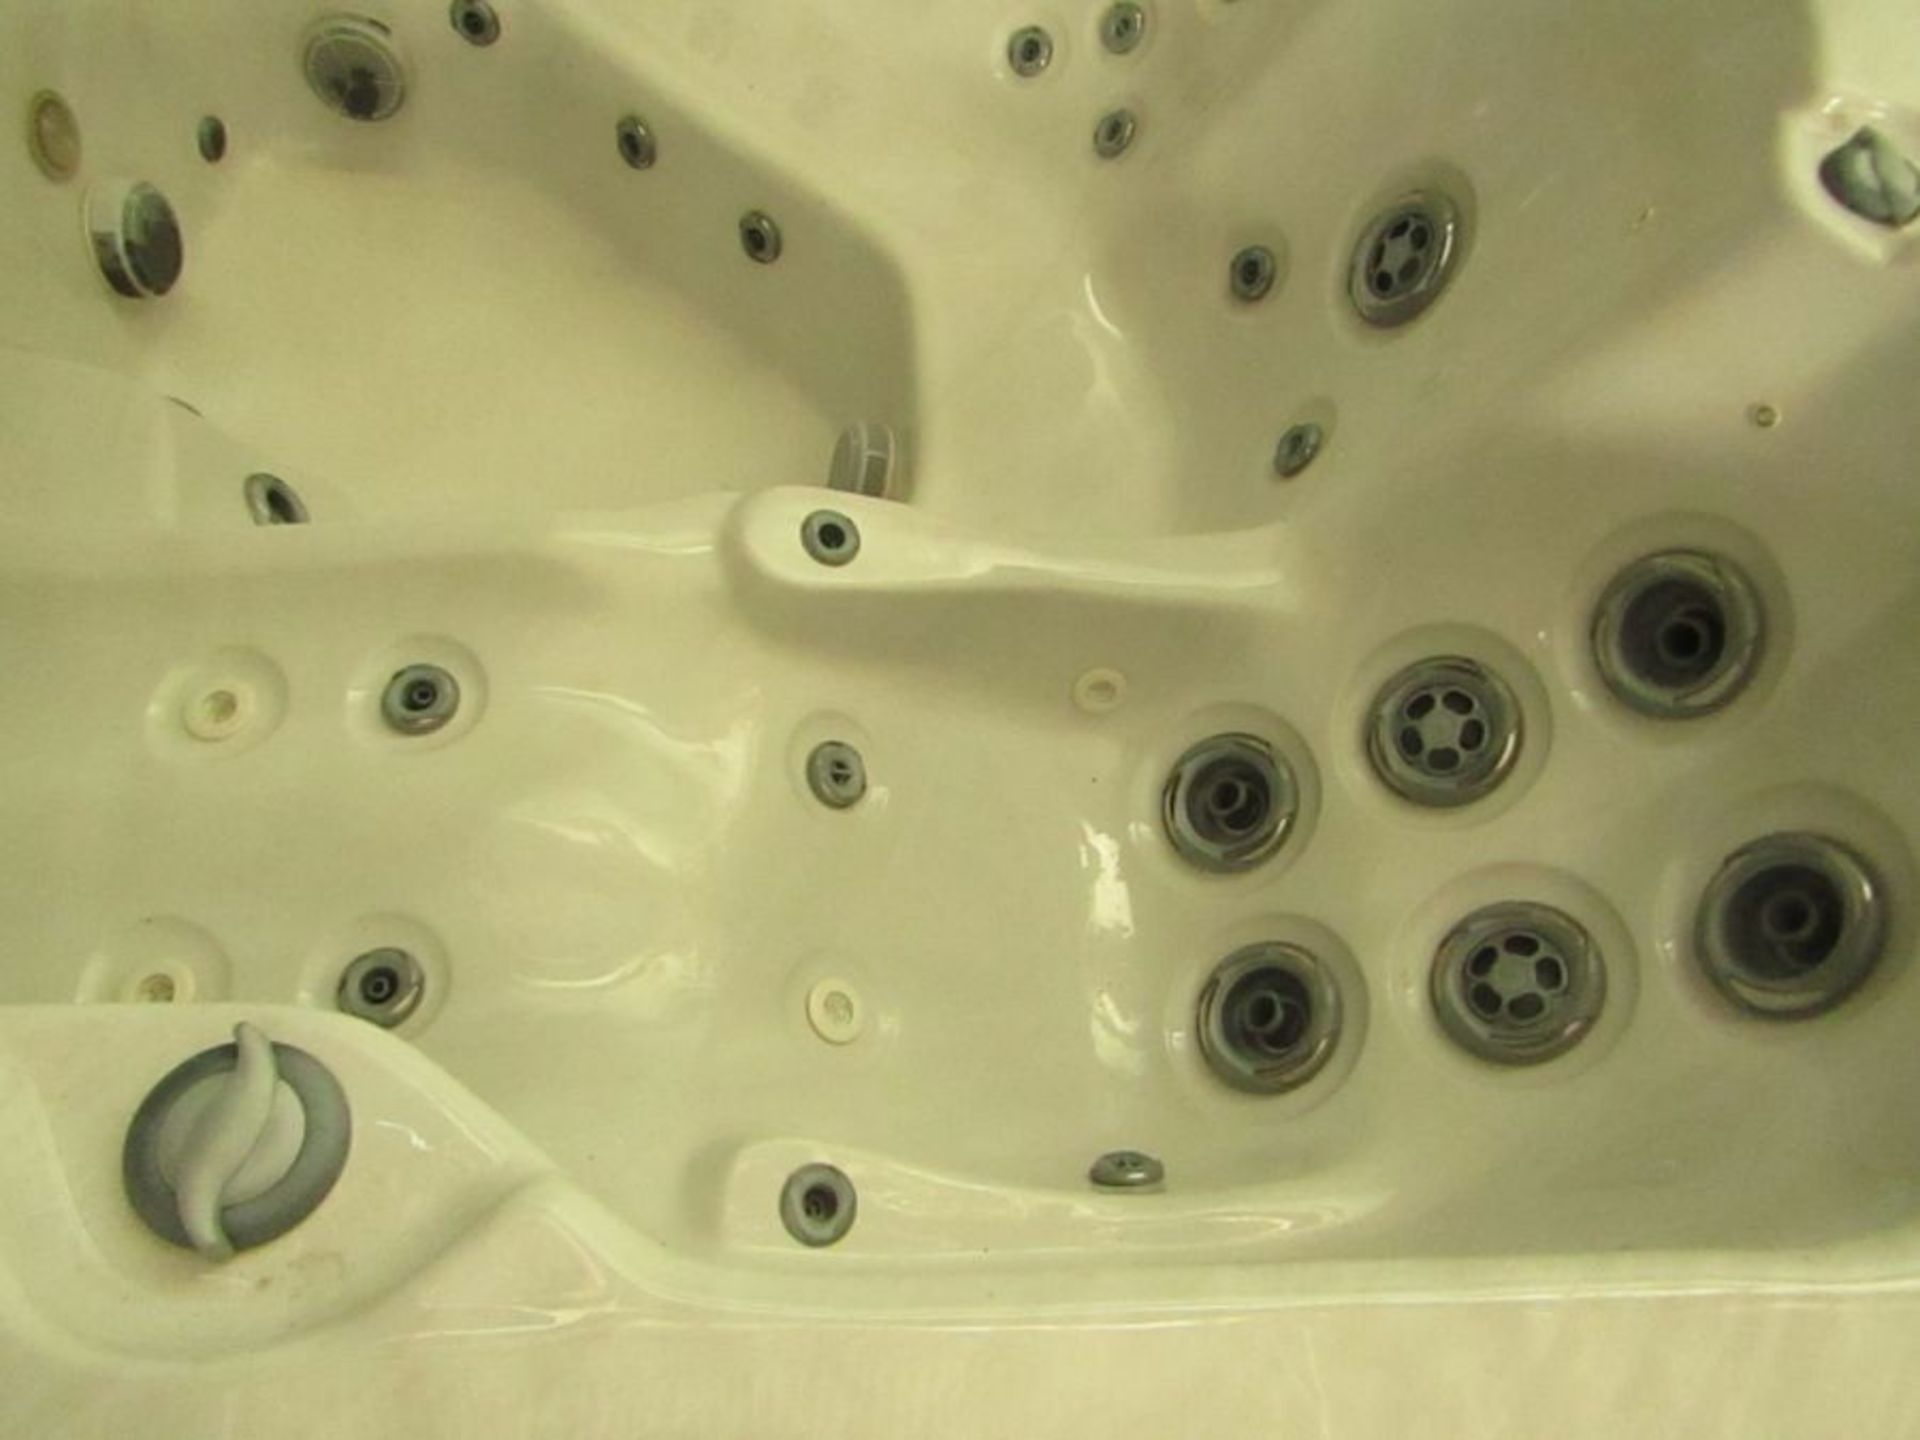 Canadian Spa Vancouver 6 person Hot Tub, Unchecked for working condition and Unknow reason for - Image 9 of 18